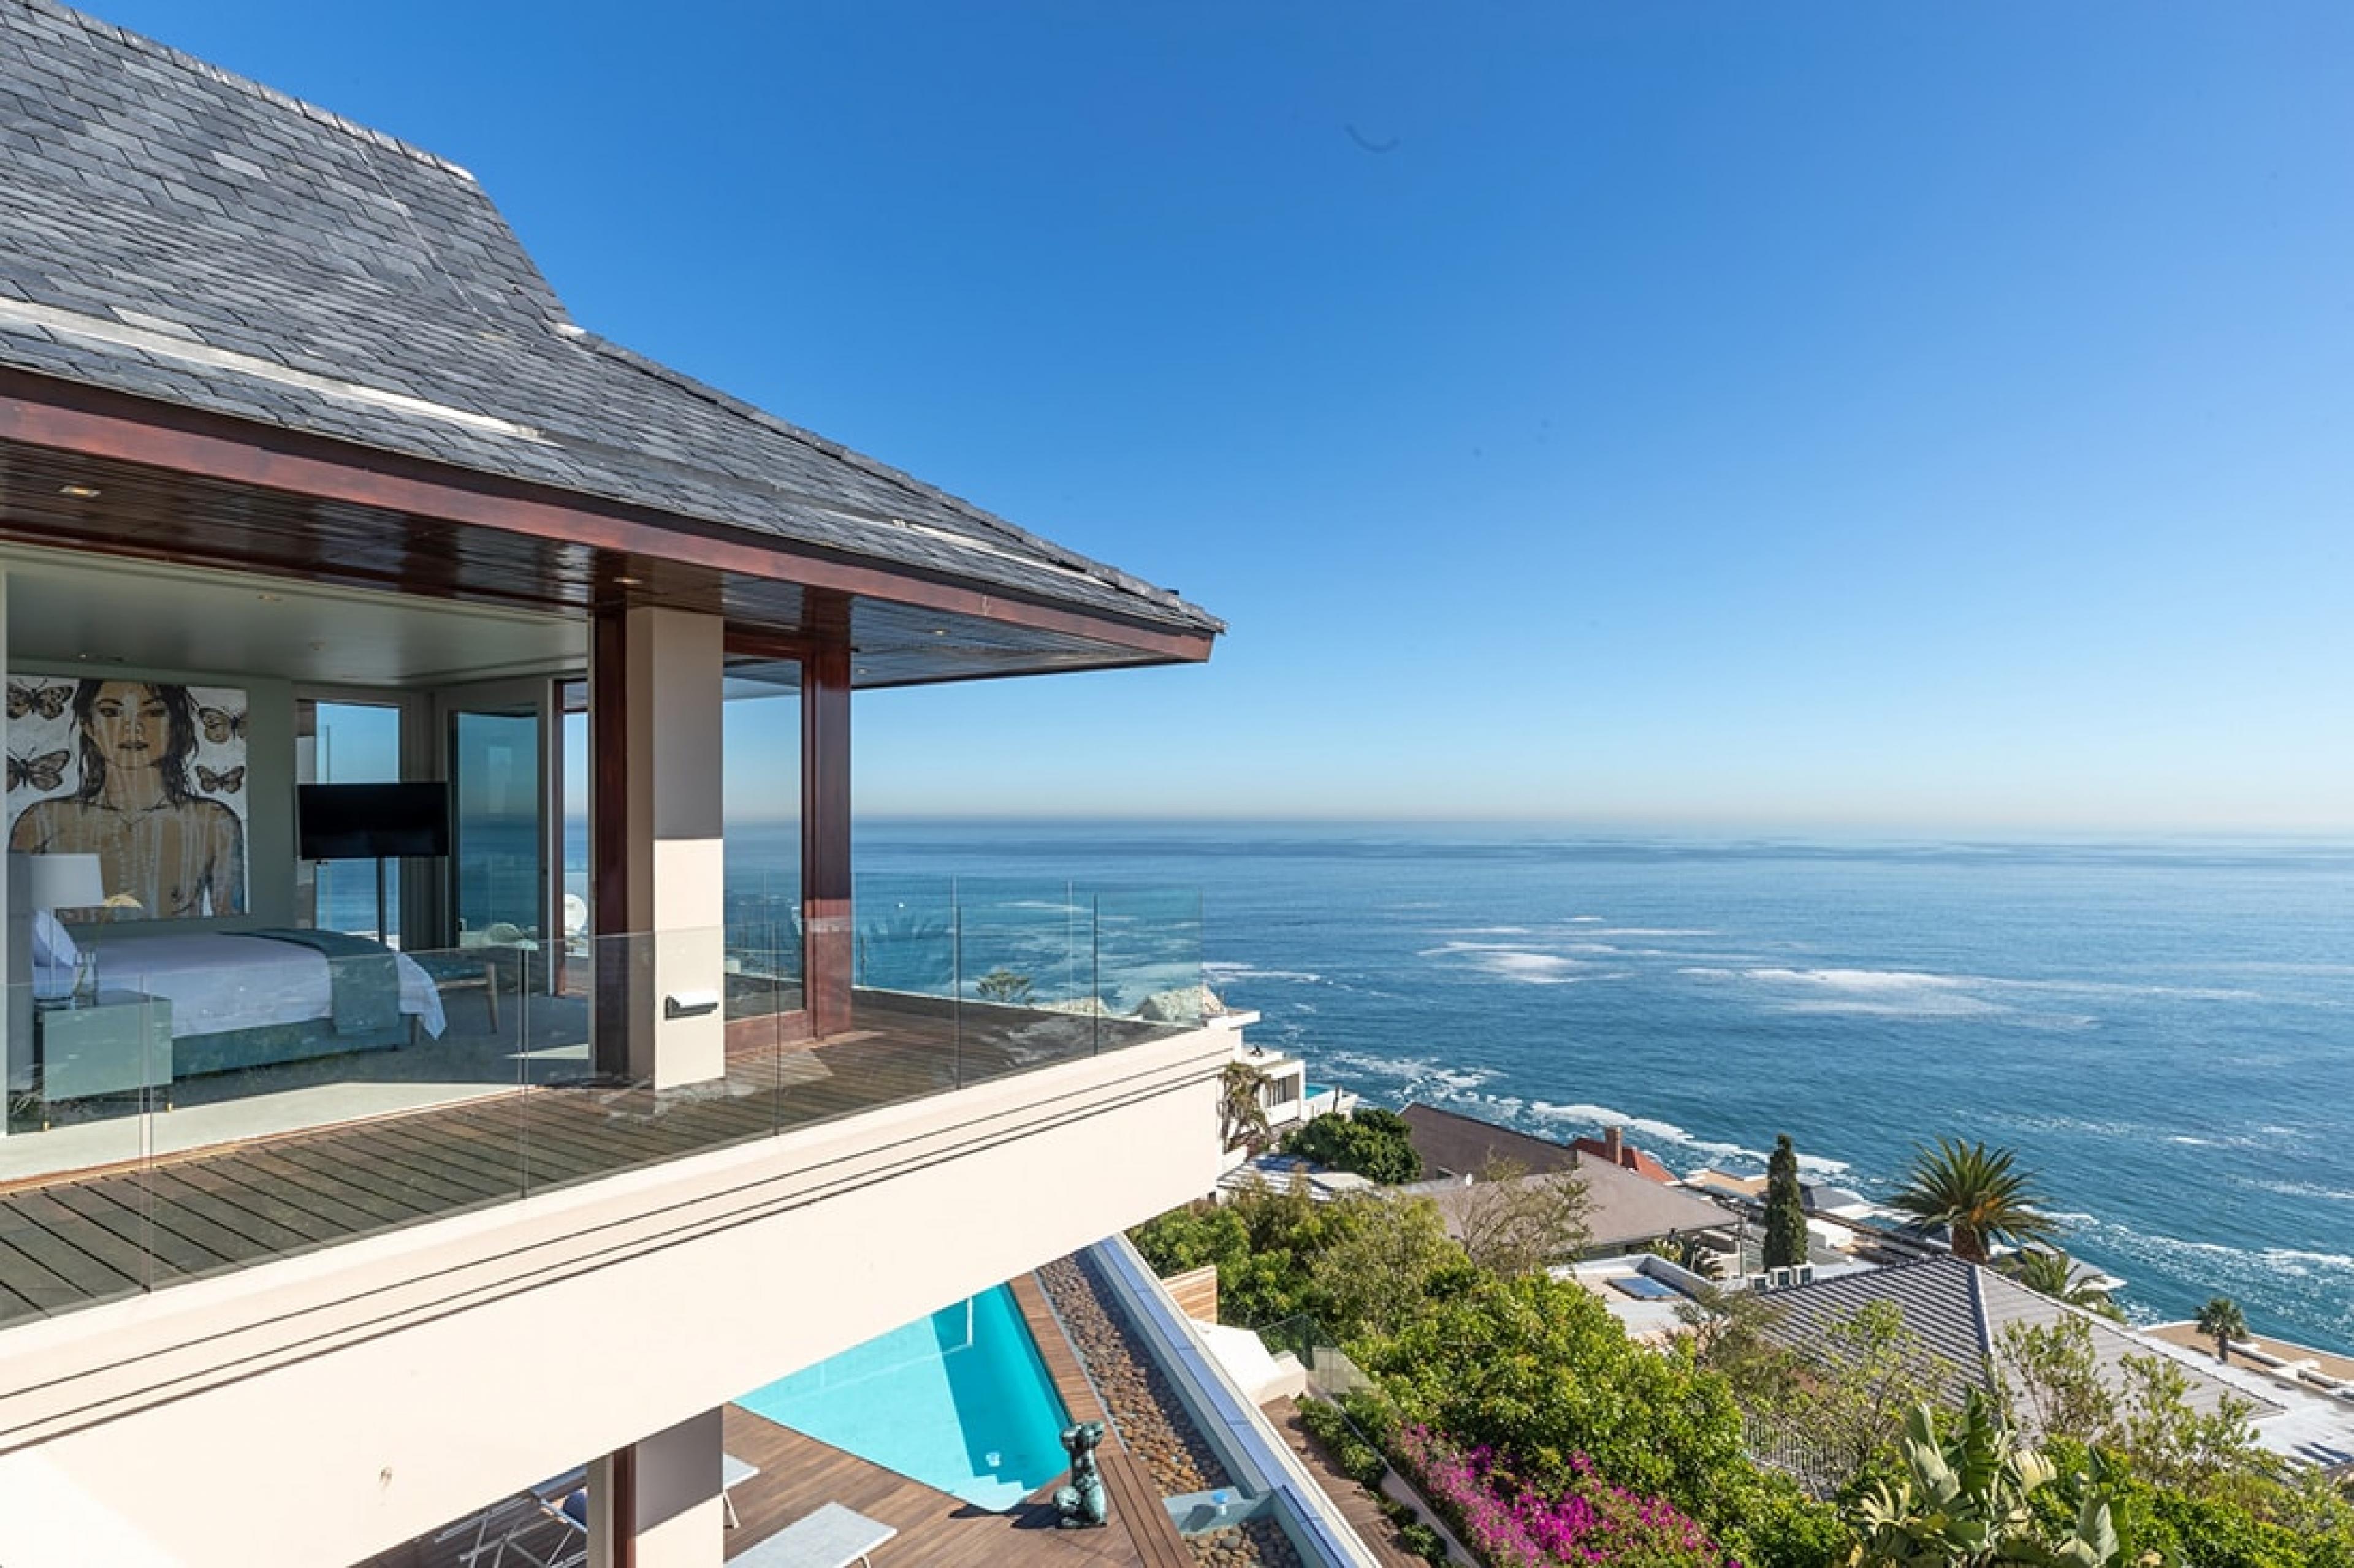 Ellerman House suite with terrace and modern art  looking over the ocean